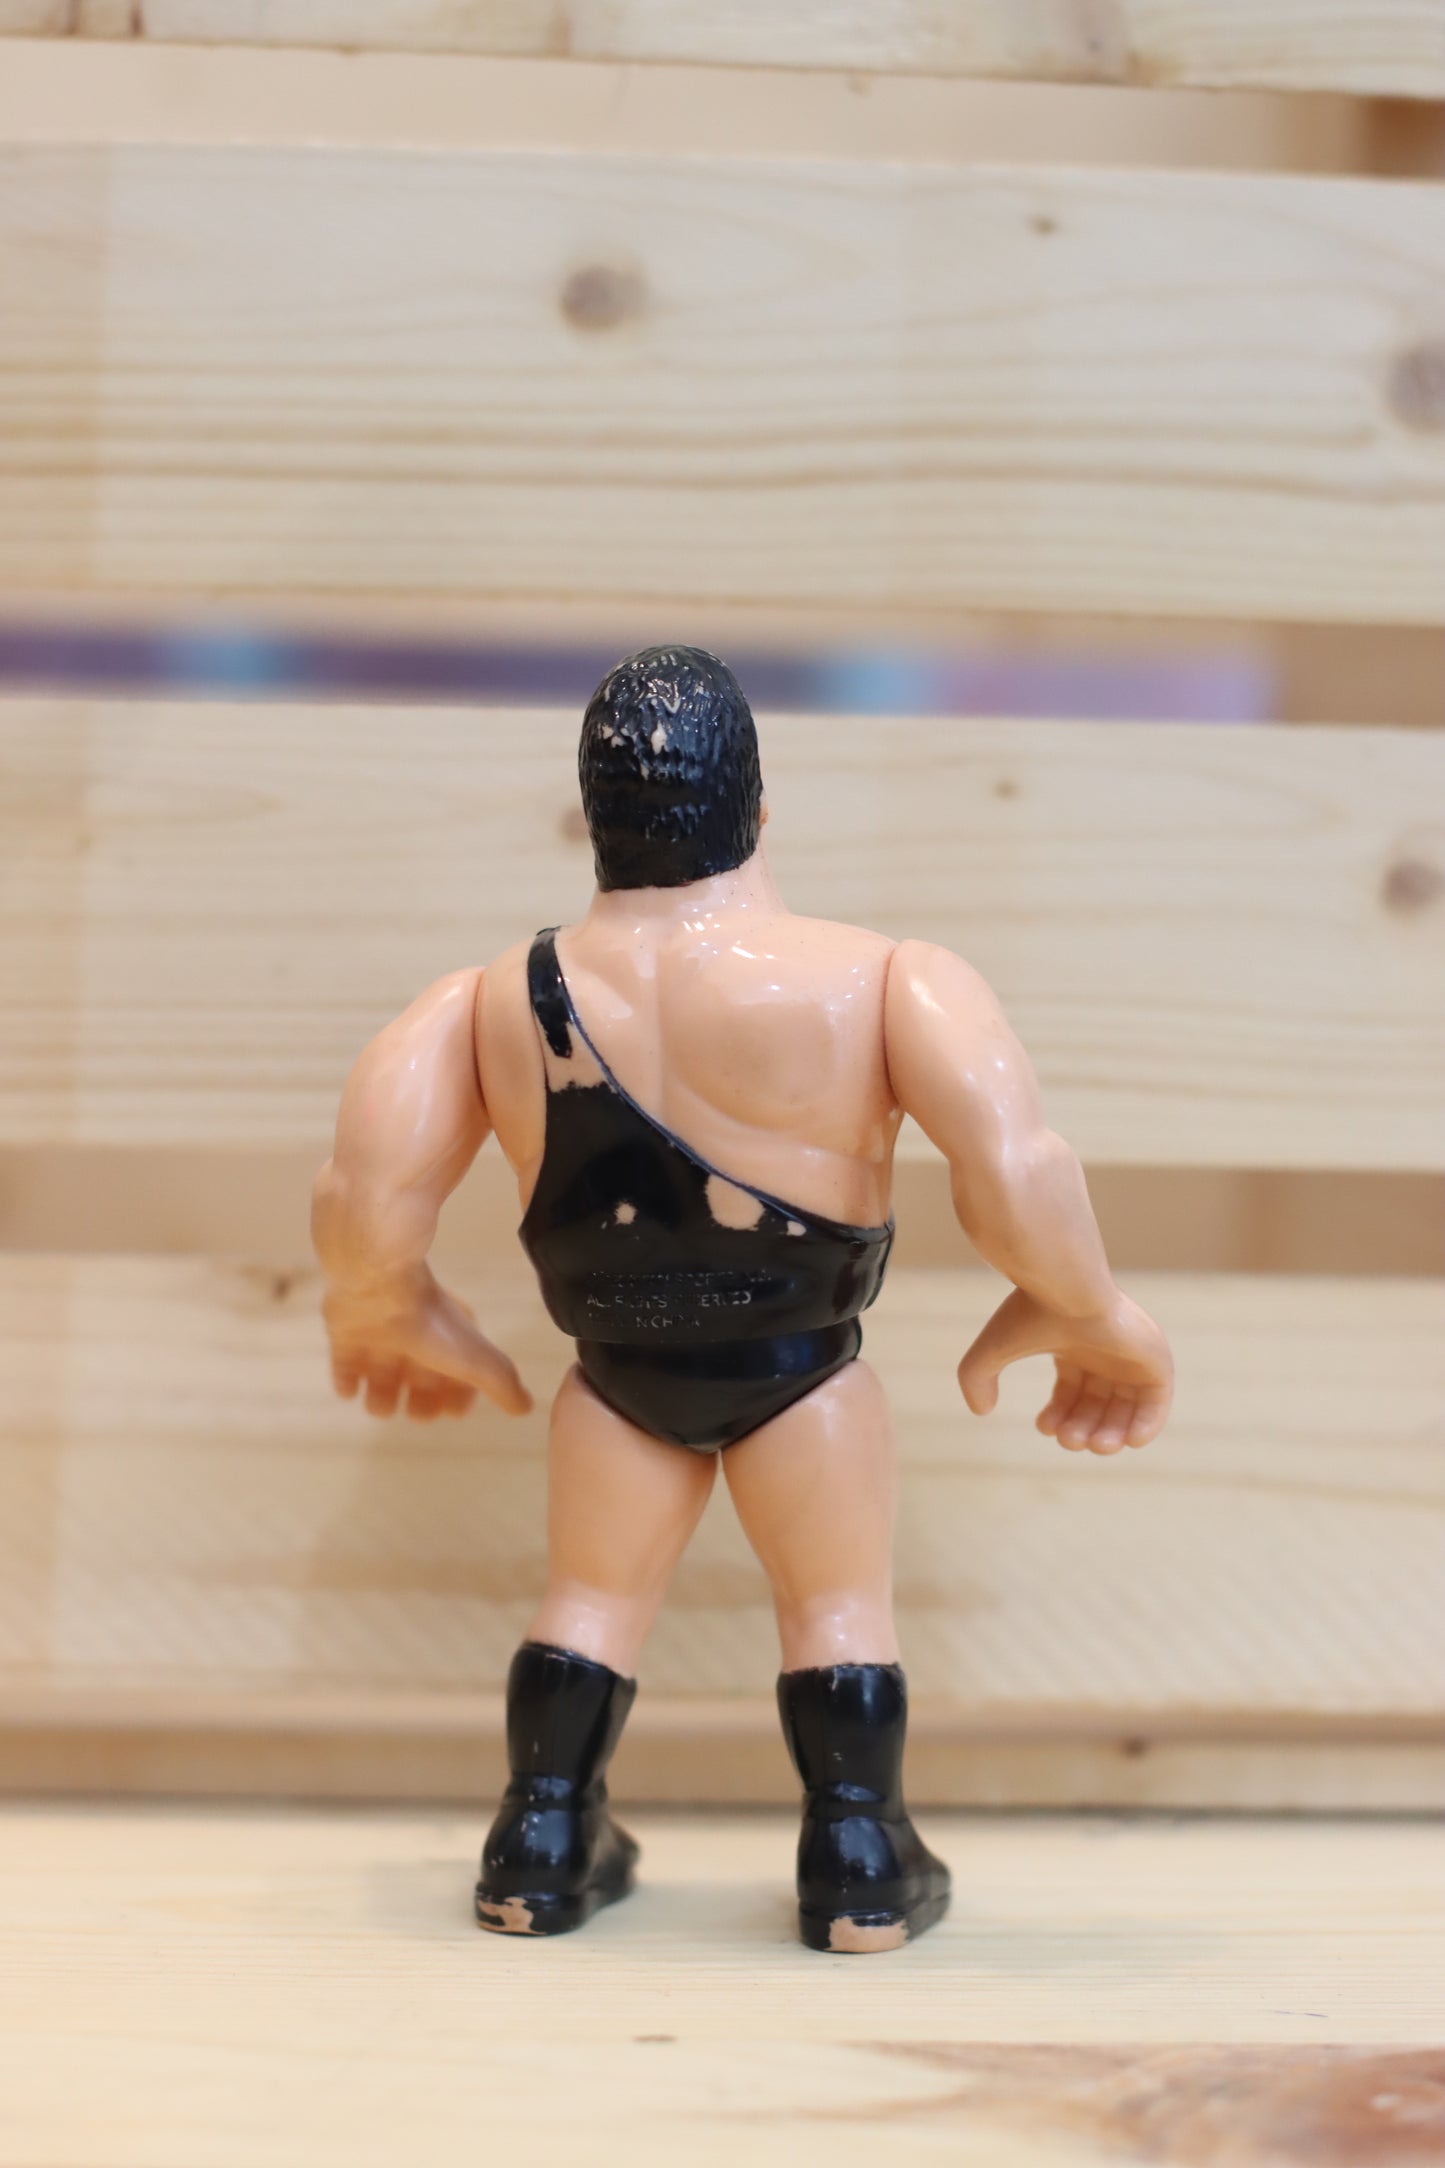 1991 Hasbro Andre the Giant Rare Loose Wrestling Figure Mint!